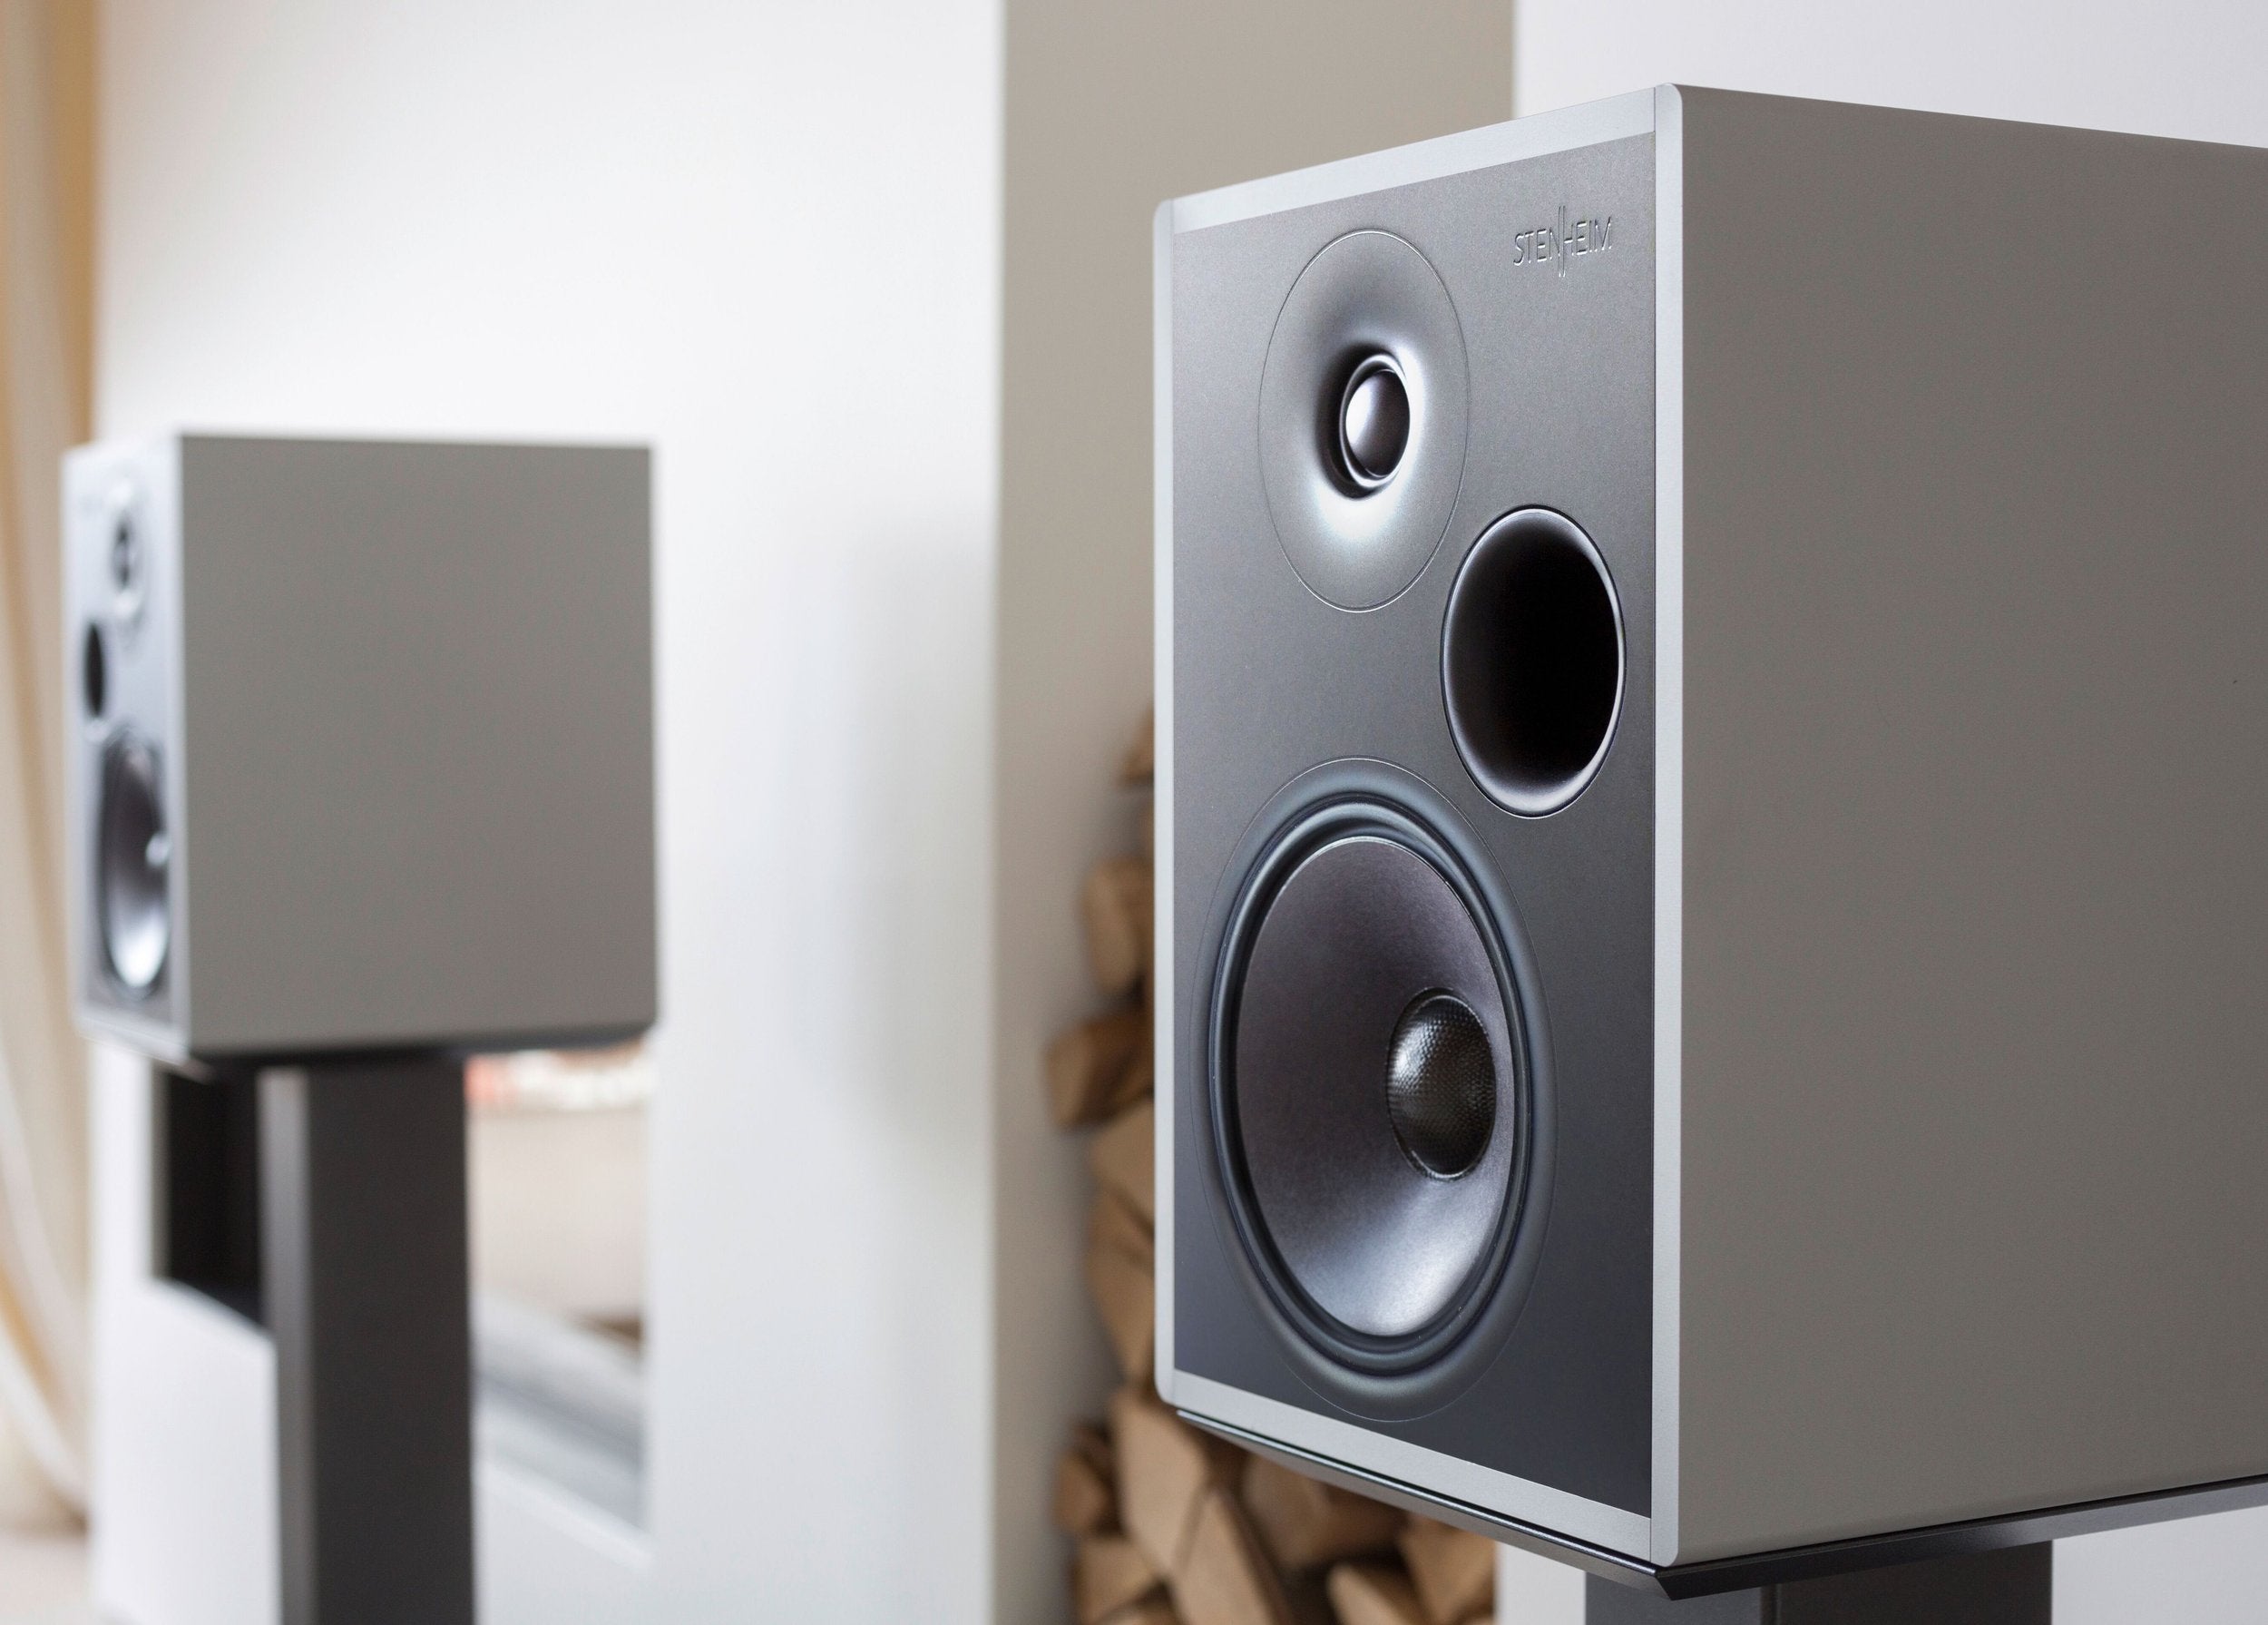 Stenheim Alumine Two Loudspeakers (available to demo)